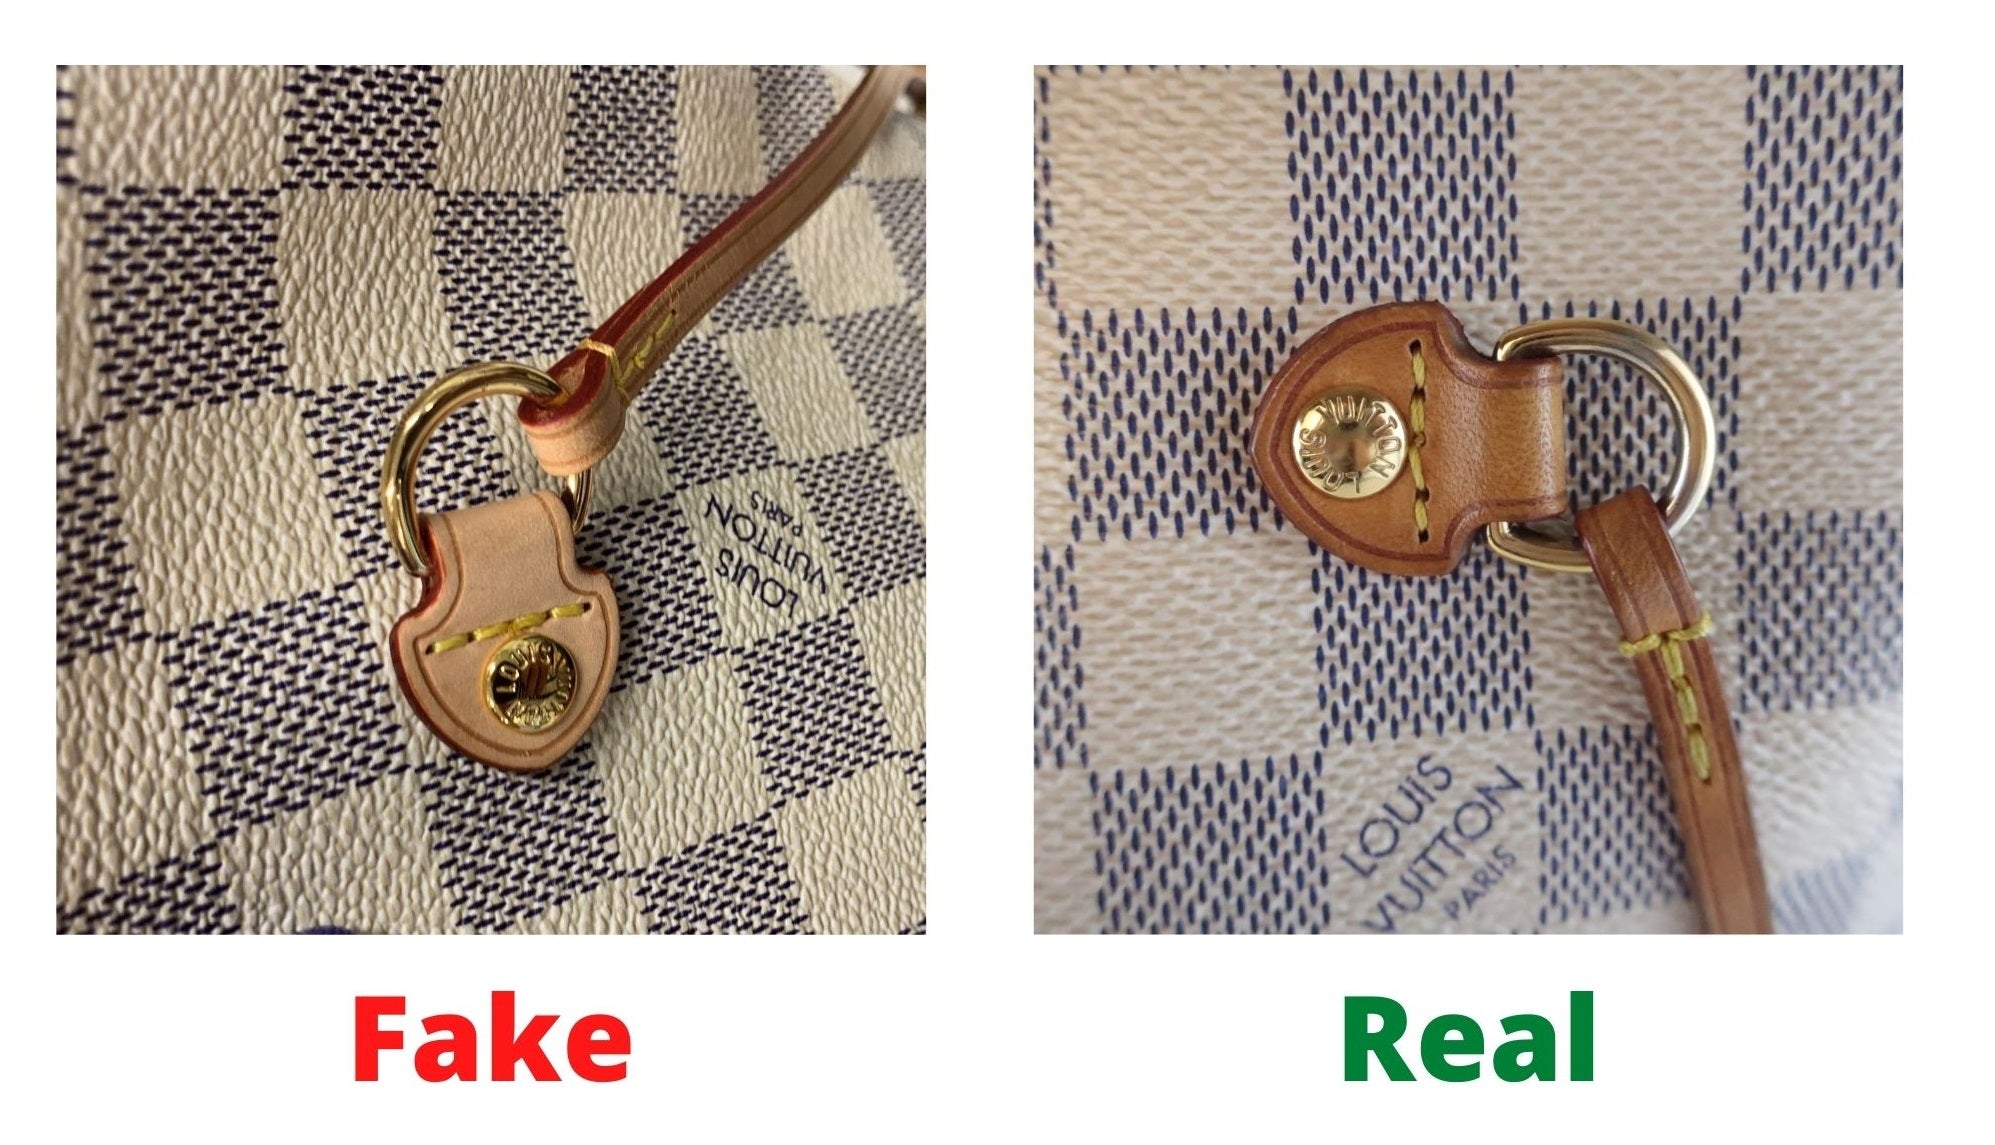 Fake Louis Vuitton Neverfull vs Real: Important Details You Should Definitely Pay Attention To (With Photo Examples) Neverfull Damier Azur real vs fake pin